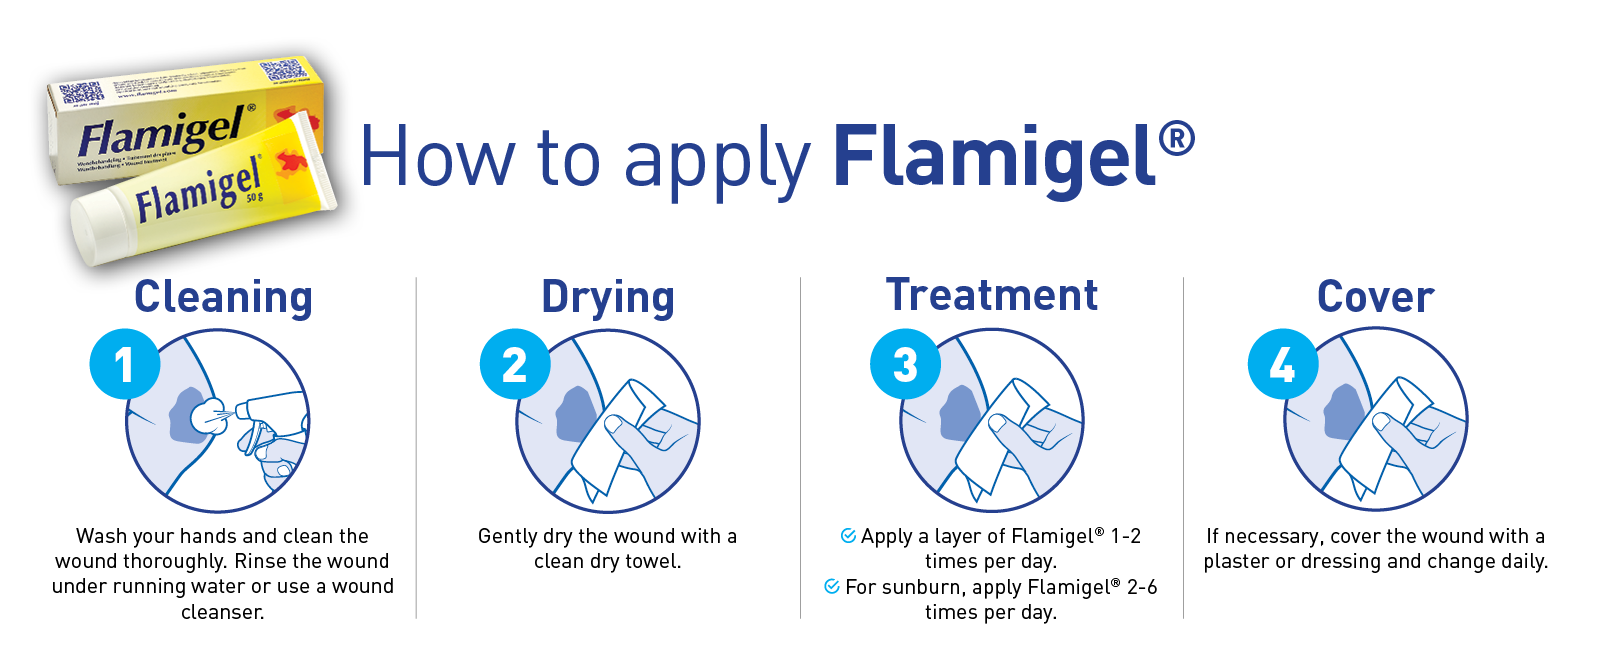 ehc-flamigel-web-page-banner-1200x500_aug-20224.png